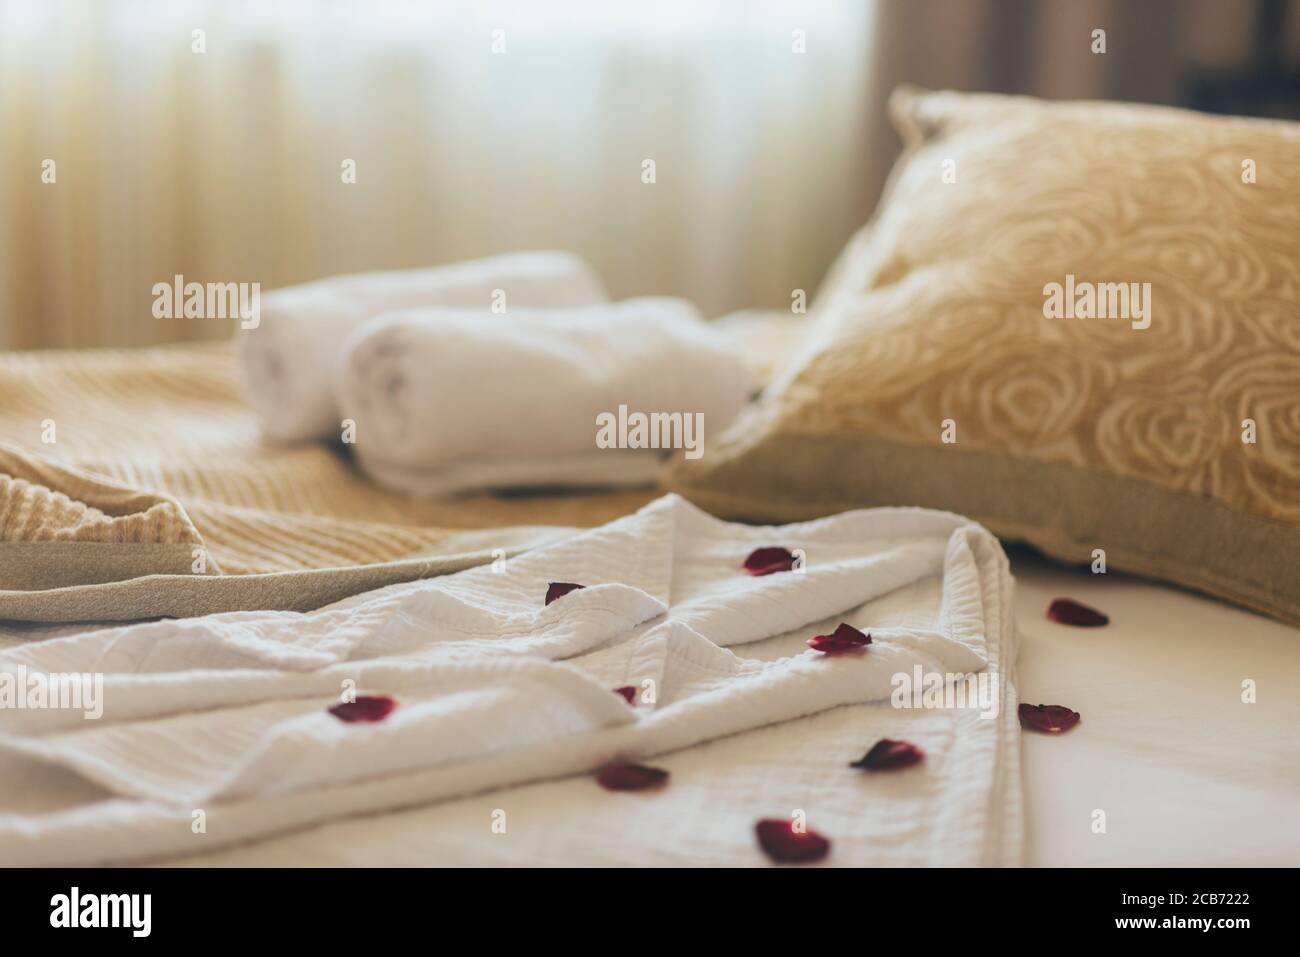 Luxury wellness and spa hotel room arranged for romantic weekend. Honeymoon suite bedroom decorated with rose petals on bed sheets and clean towels. R Stock Photo